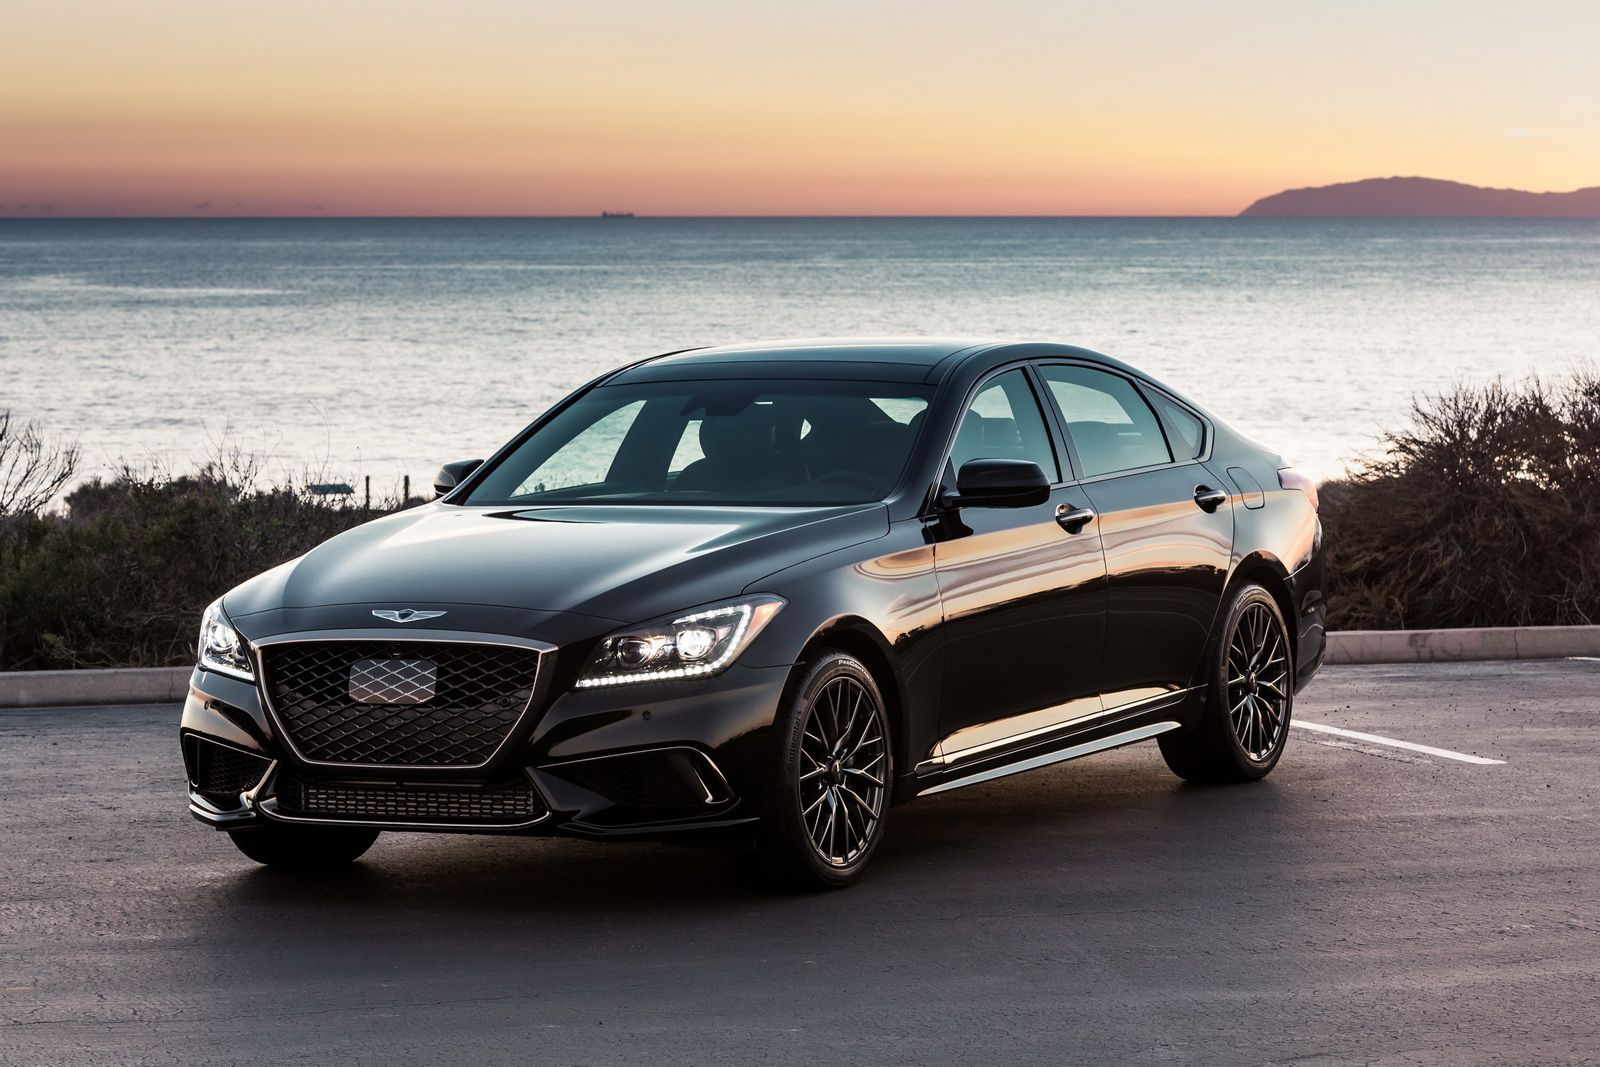 GENESIS DEBUTS 2018 G80 SPORT TRIM WITH 3.3-LITER TURBOCHARGED ENGINE AND PERFORMANCE STYLING